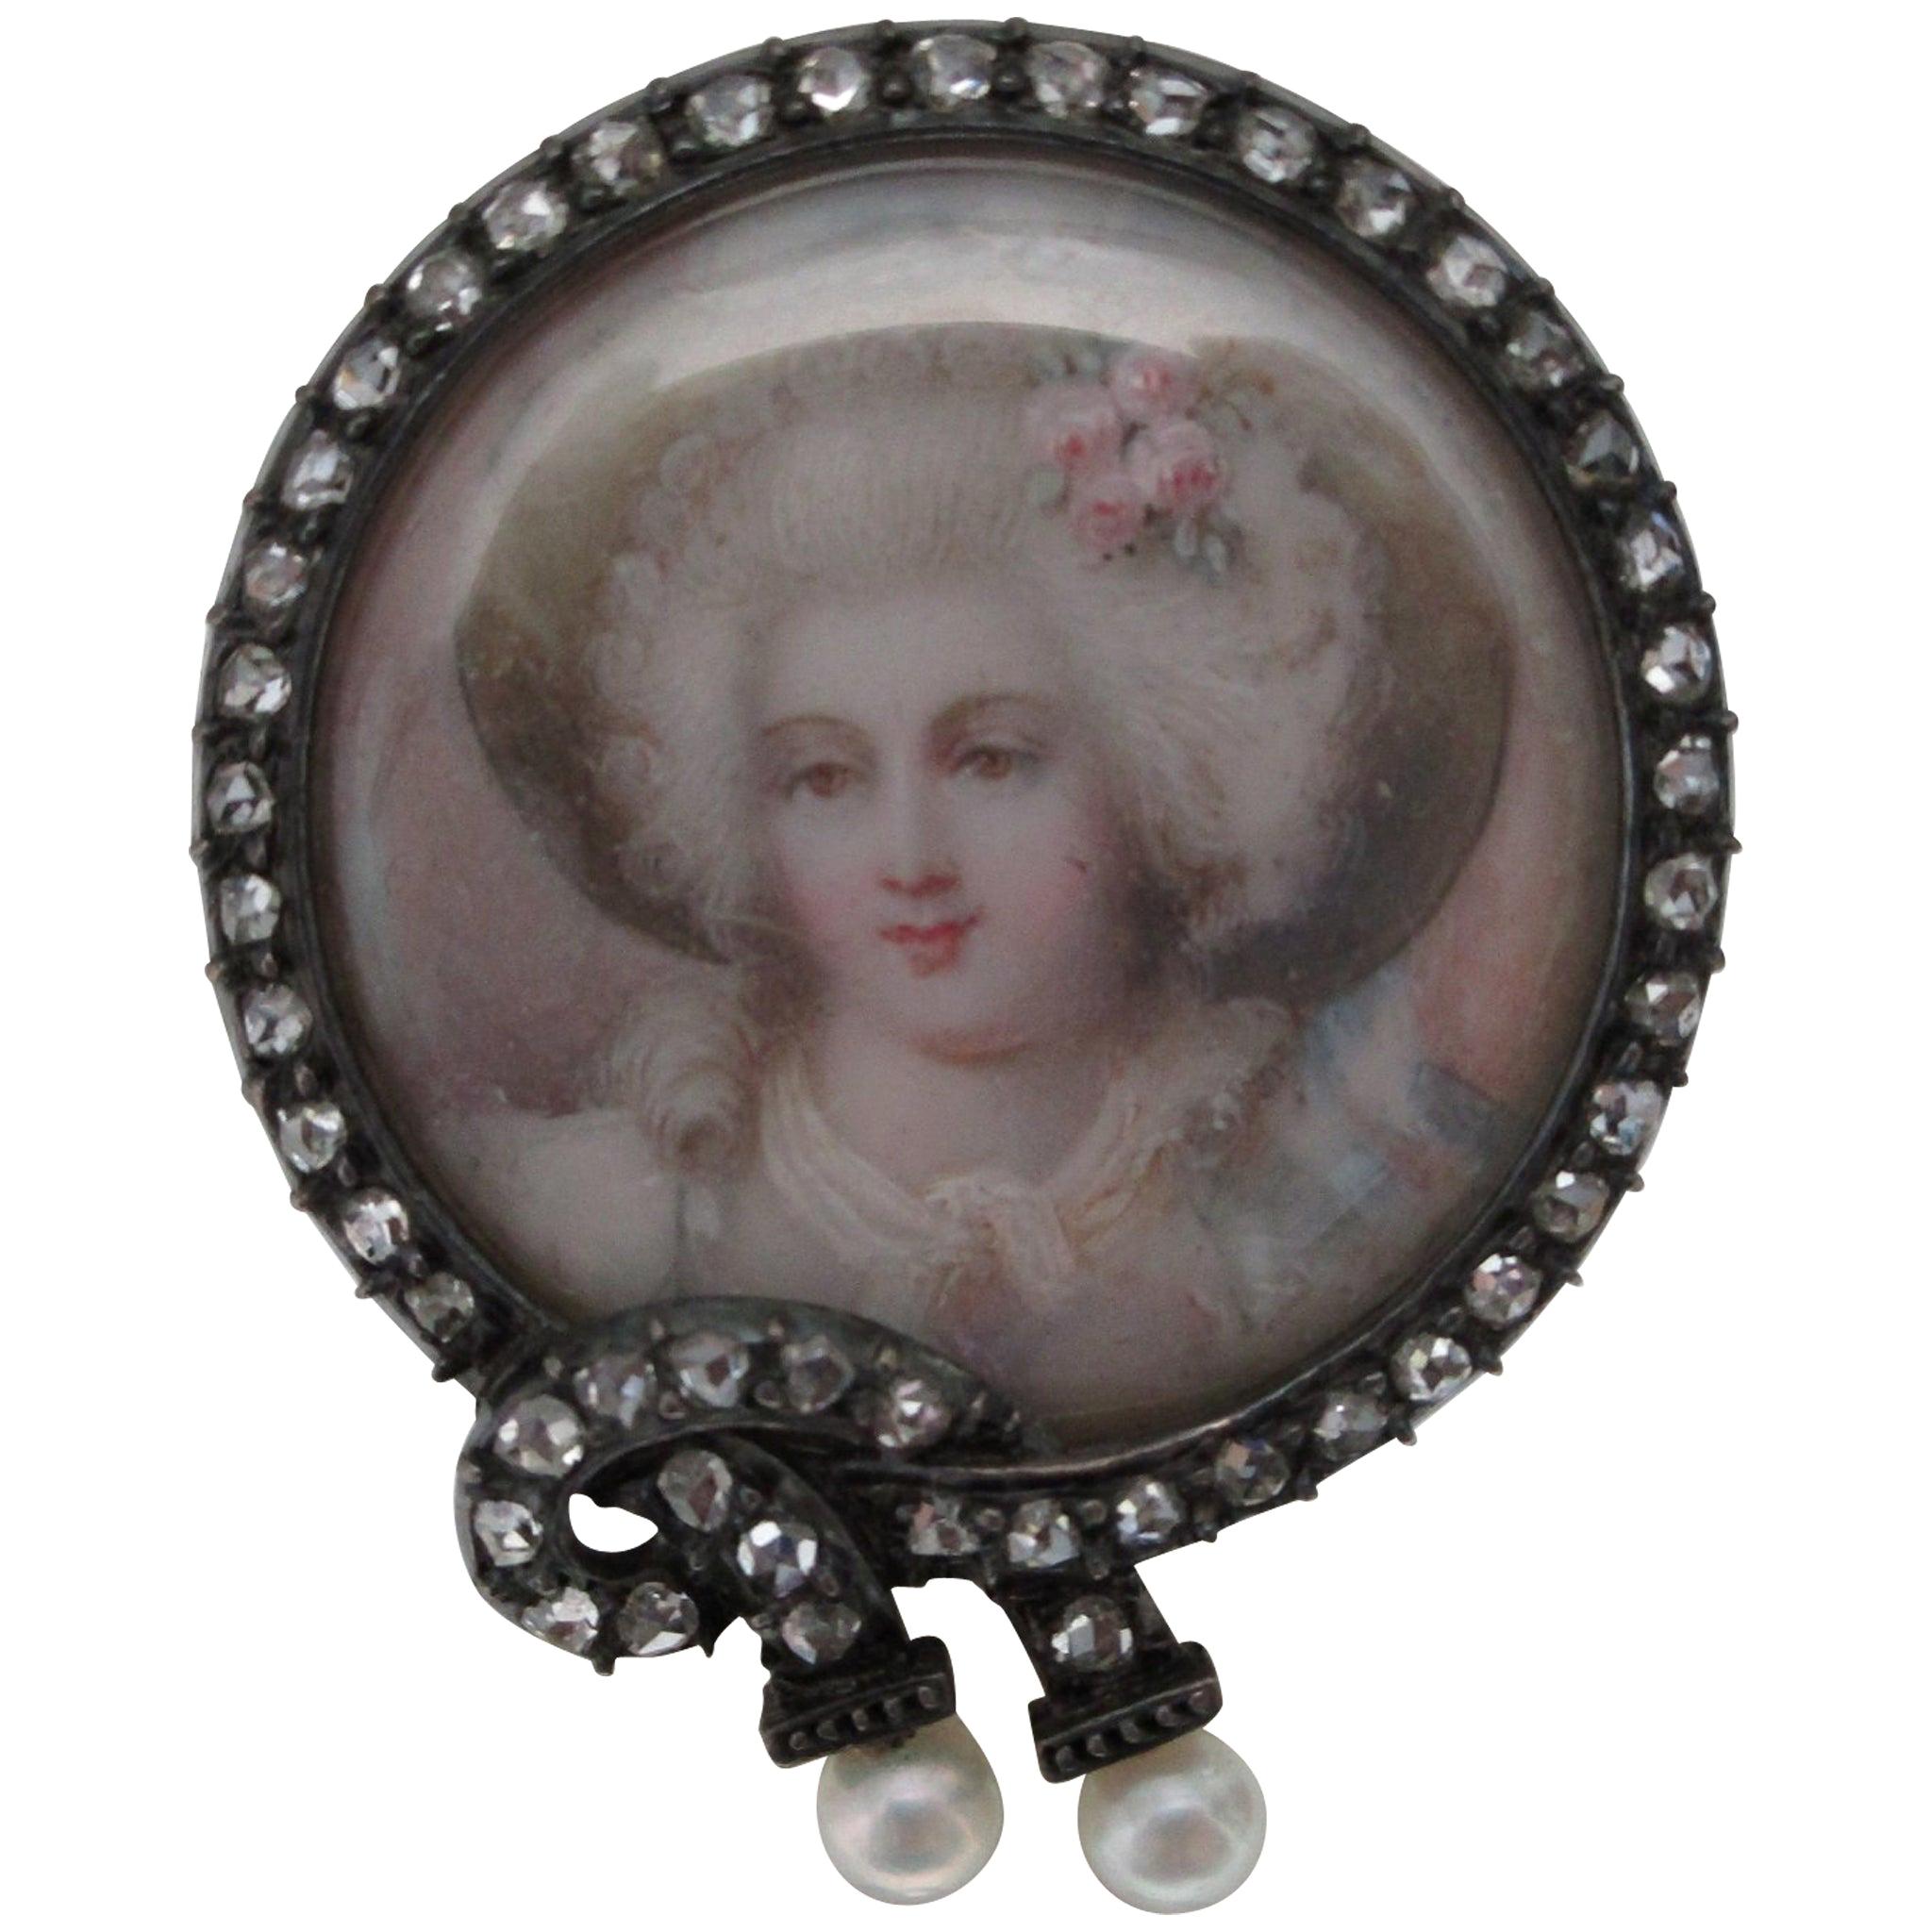 Natural Pearls and Rose Cut Diamonds on a Silver Over Gold Painted Portrait Pin